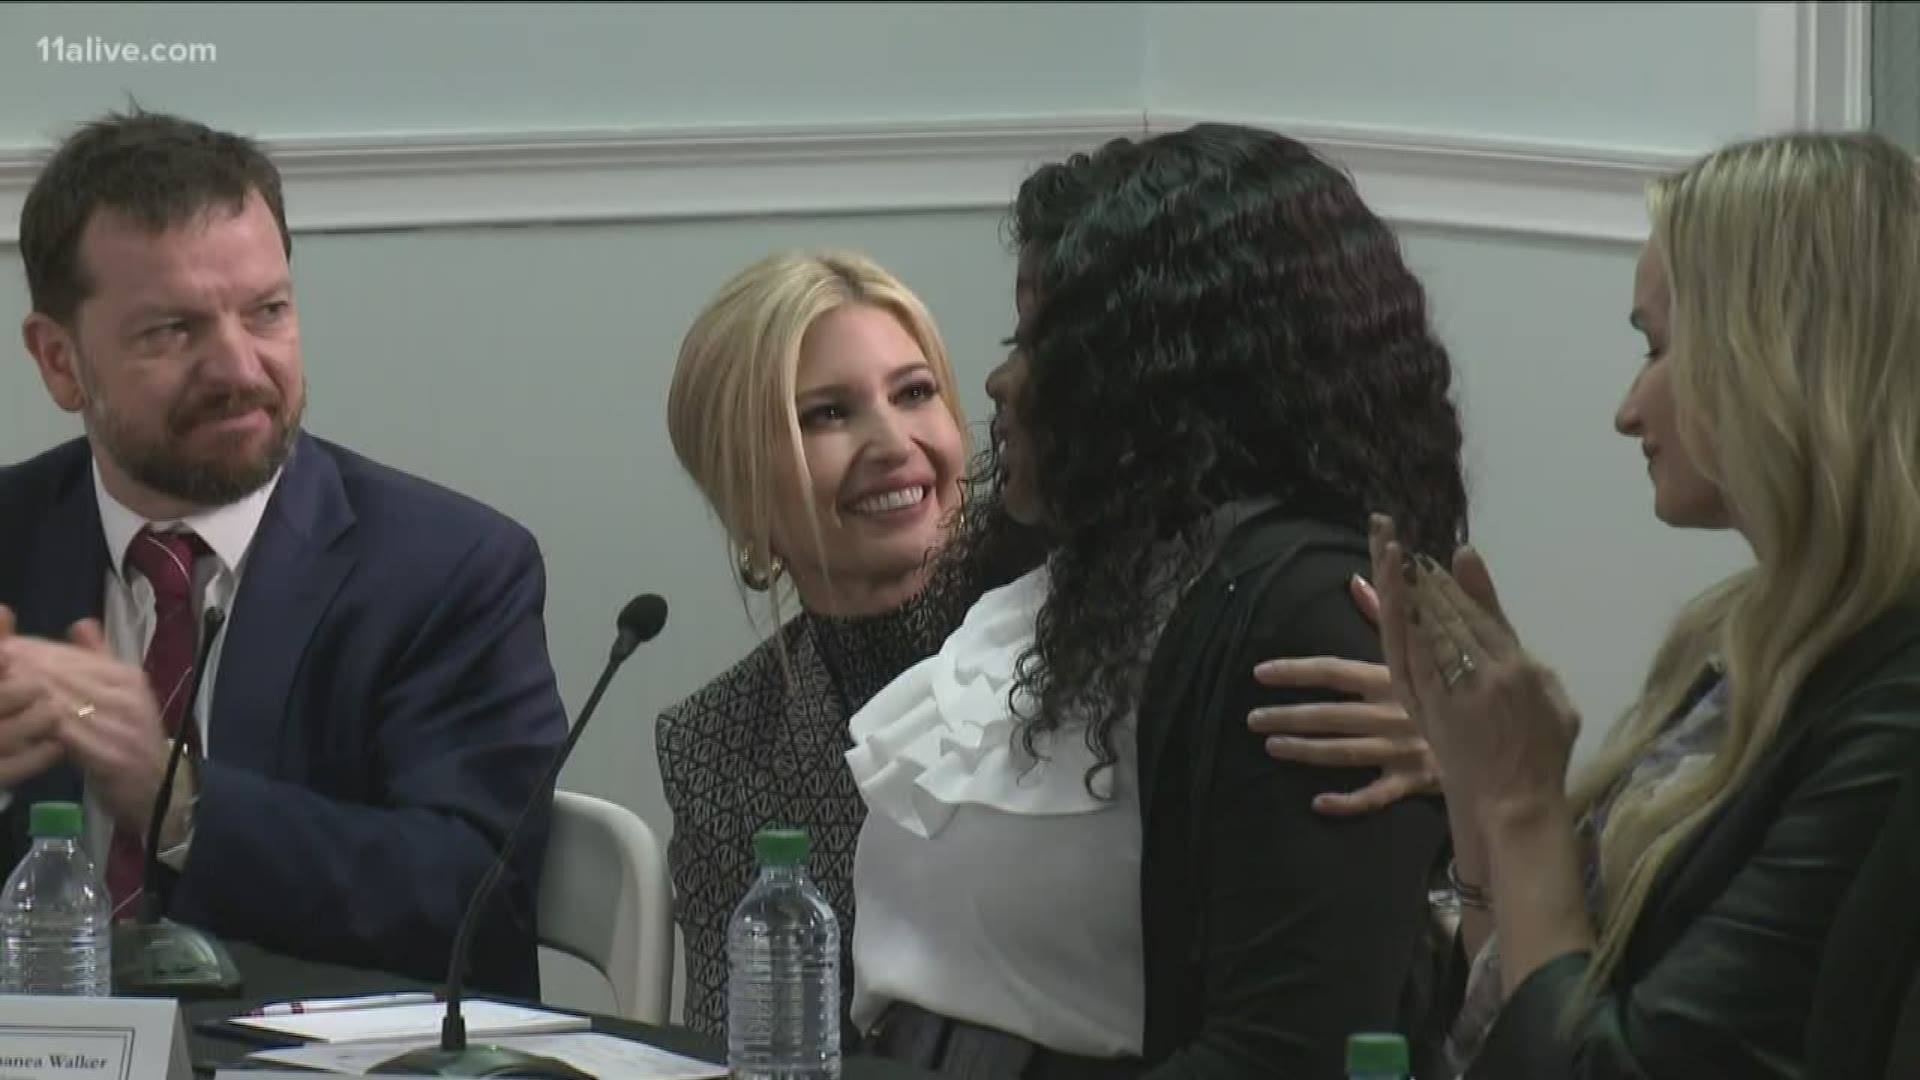 The president's daughter and advisor met with public officials and trafficking survivors.